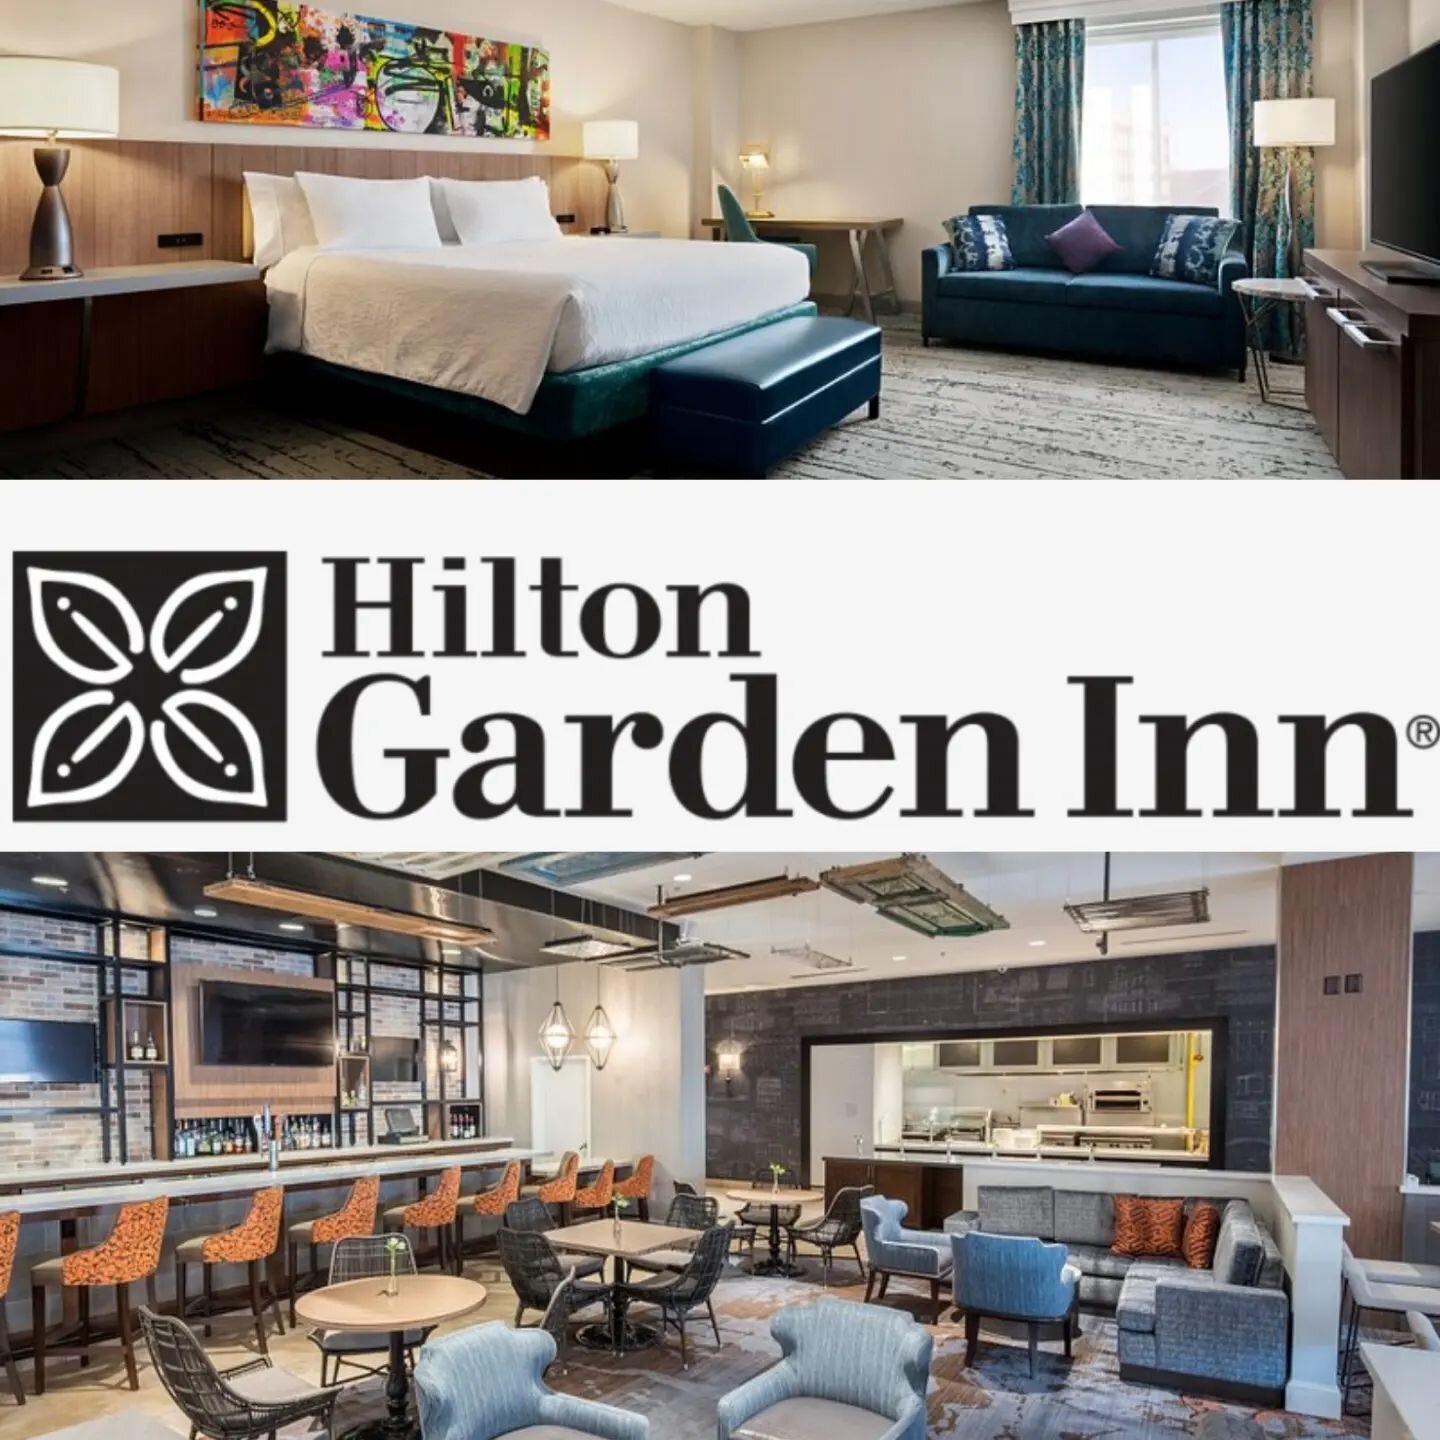 Enjoy the Simple &amp; Extra Clean accommodations in New Orleans. A pleasure working with you! Good luck at the event! 👍 @ubtechrobotics 

#neworleans #exhibitor #tradeshows #businesstravel #events #hilton #travel #travelphotography #hotelroom #nola